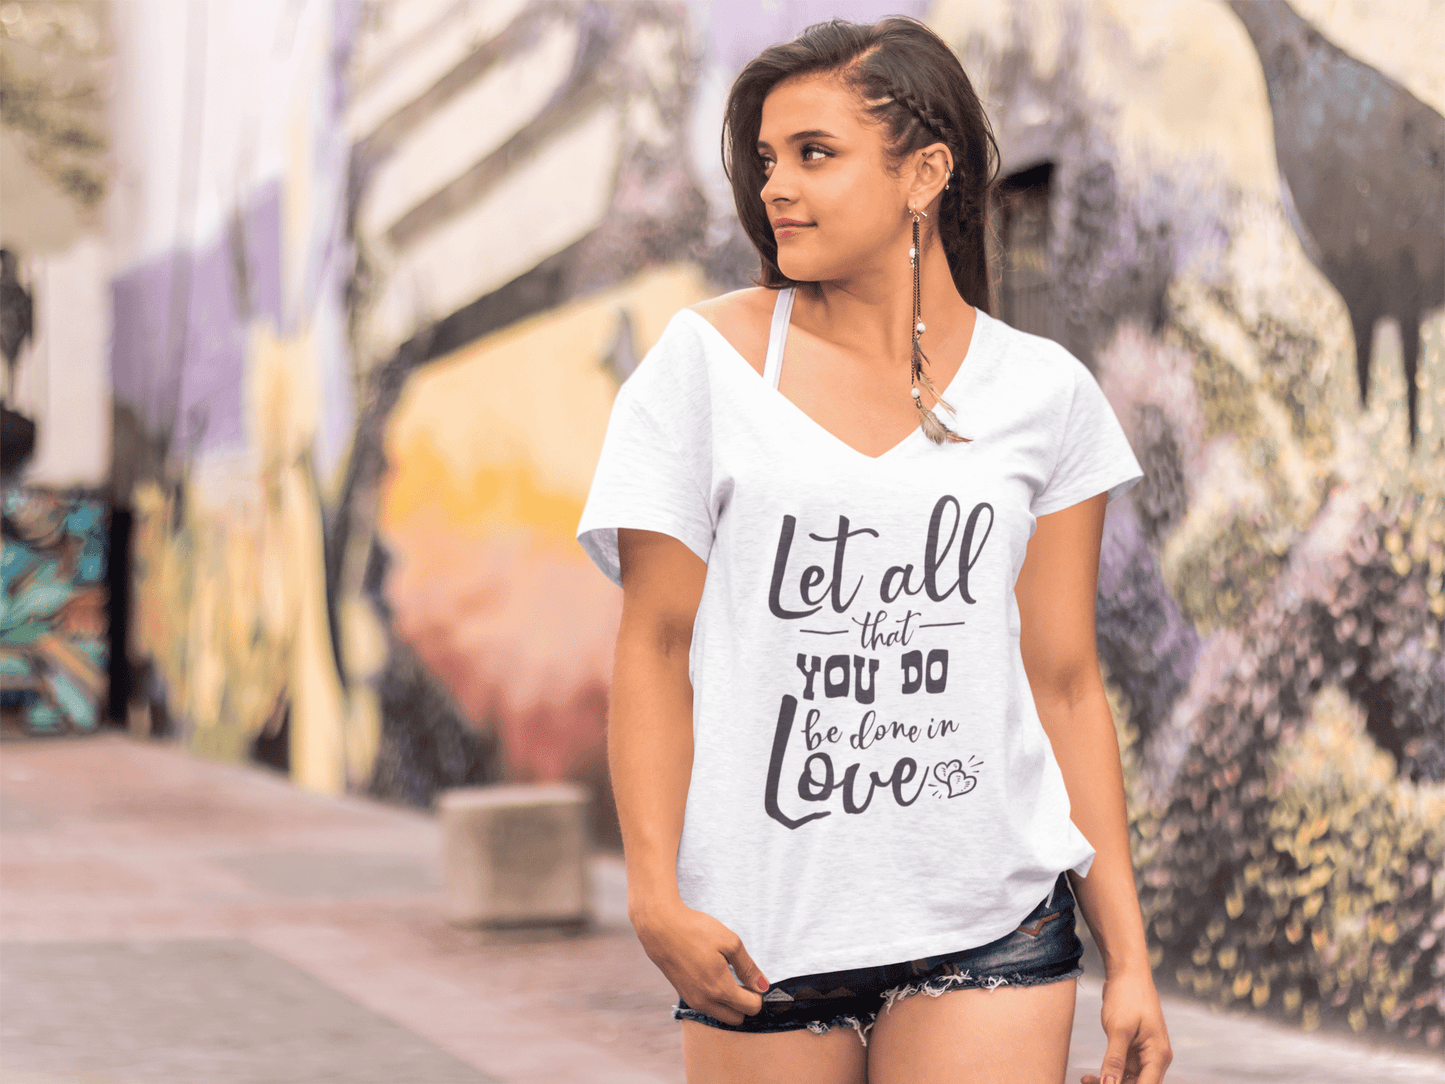 ULTRABASIC Damen-T-Shirt Let All That You Do be Done In Love – Kurzarm-T-Shirt-Oberteile